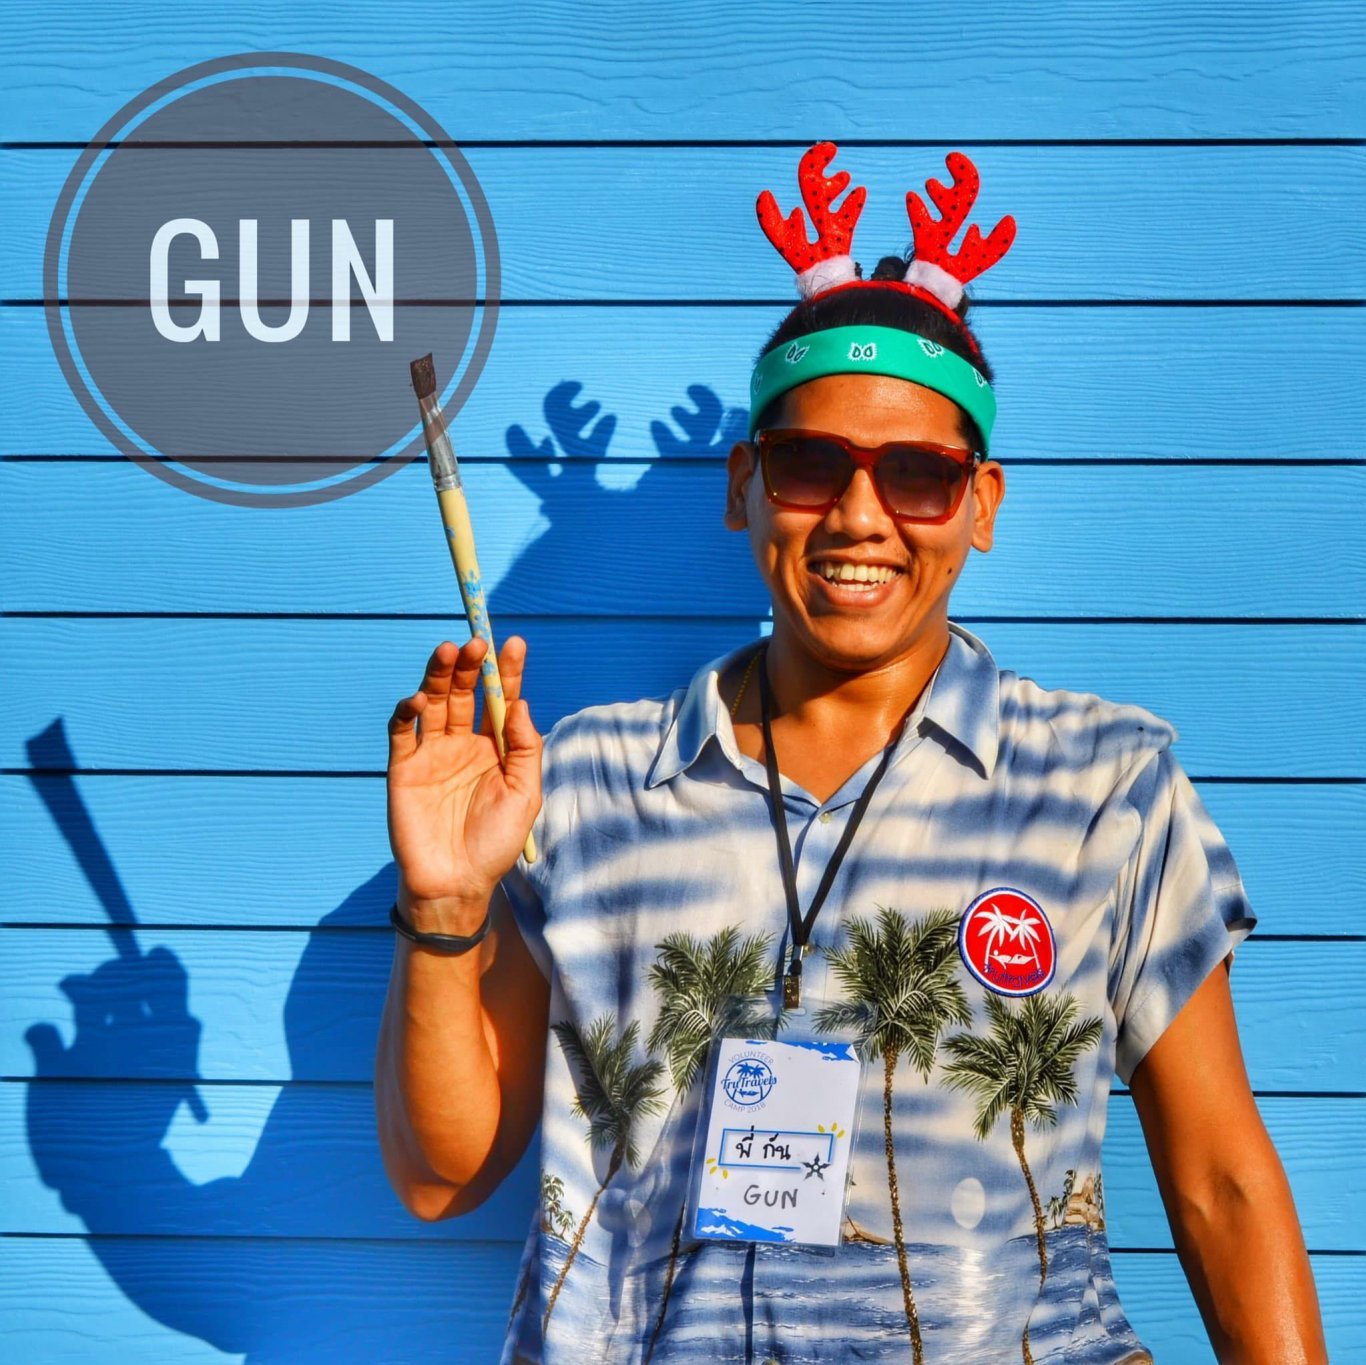 Man wearing colourful shirt wearing red Christmas antlers holding paint brush stood in front of bright blue backdrop